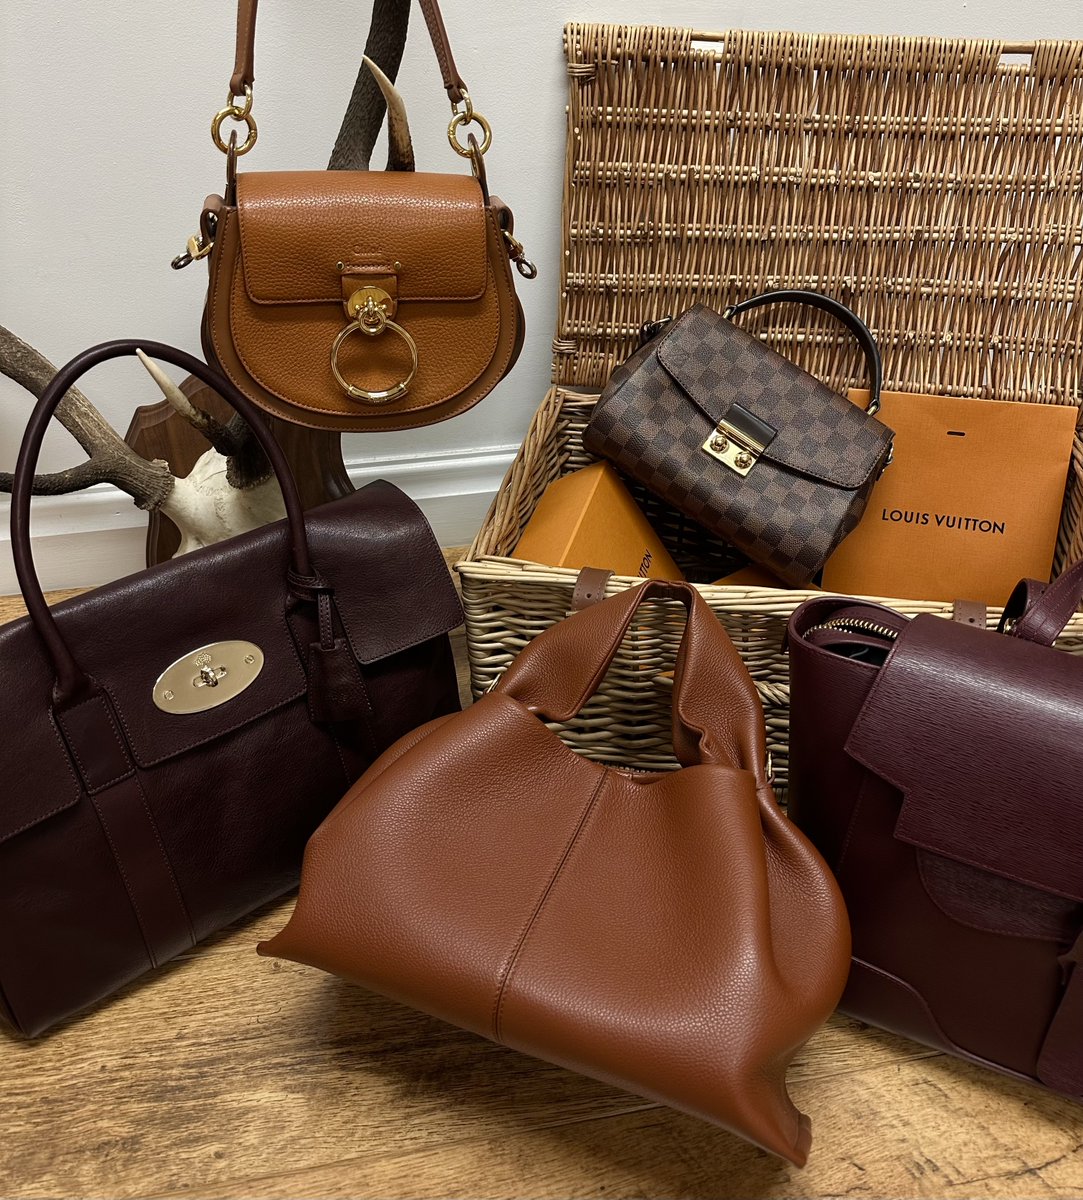 Please can Fall stay forever? 🤎🍂✨

Some of our favourite handbags to use during Autumn:
Mulberry Bayswater, Chloe Tess, Polène No.9, LV Croisette, Senreve Maestra

#fallfashion #handbags #autumnfashion